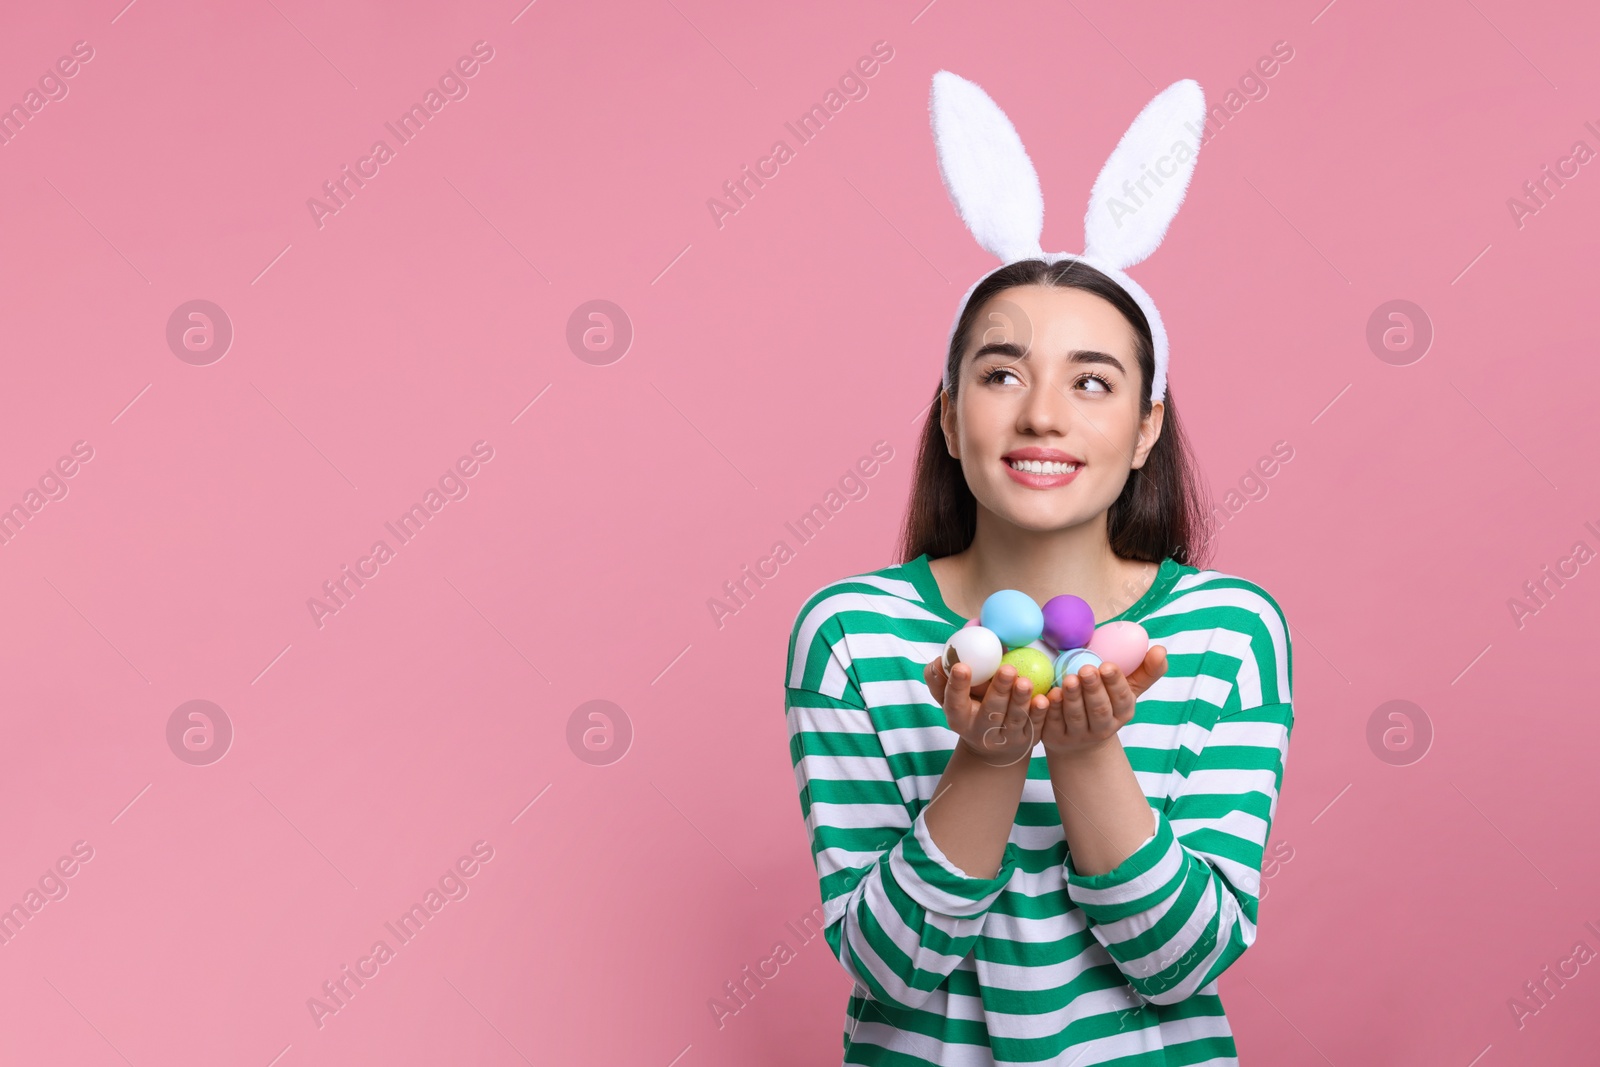 Photo of Happy woman in bunny ears headband holding painted Easter eggs on pink background. Space for text.